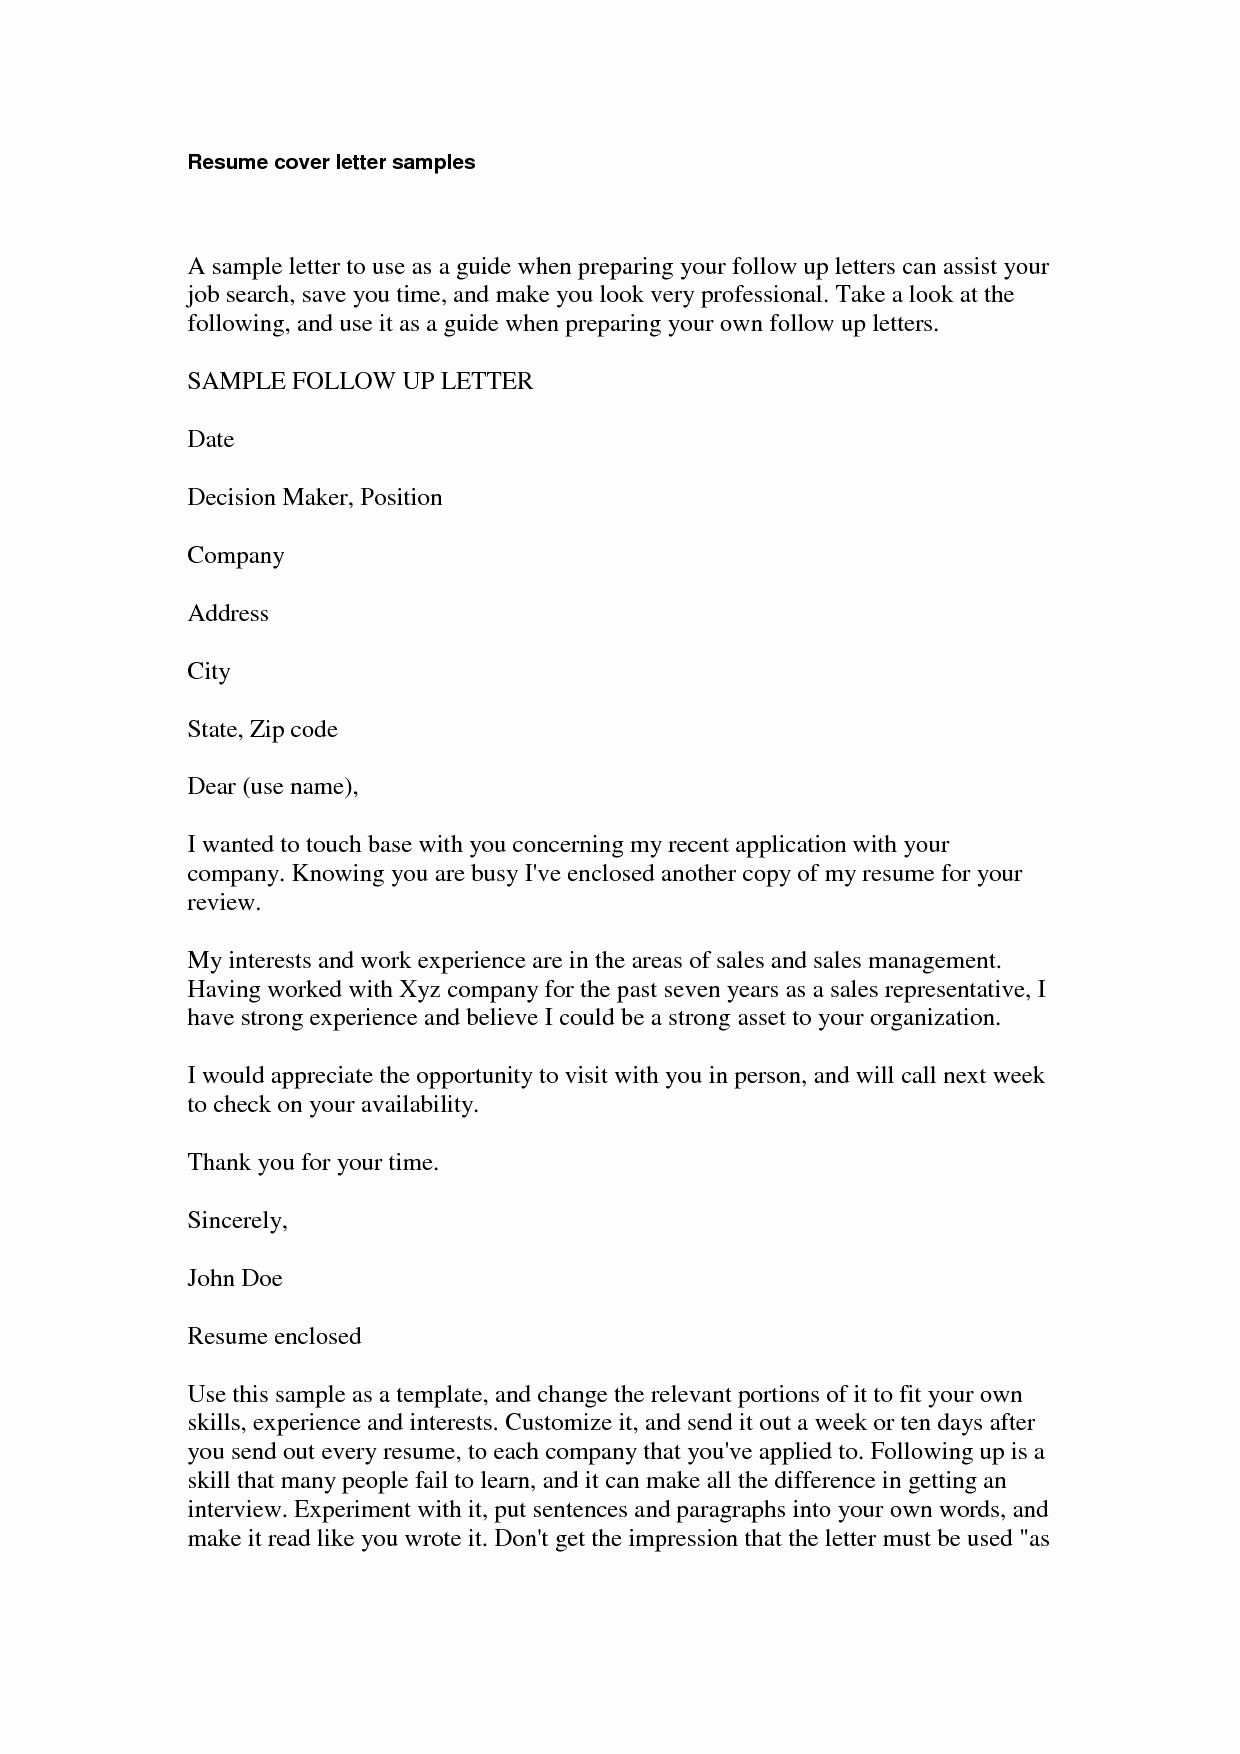 Professional Cover Letters for Resumes Awesome Best S Of Professional Resume Cover Letter Template